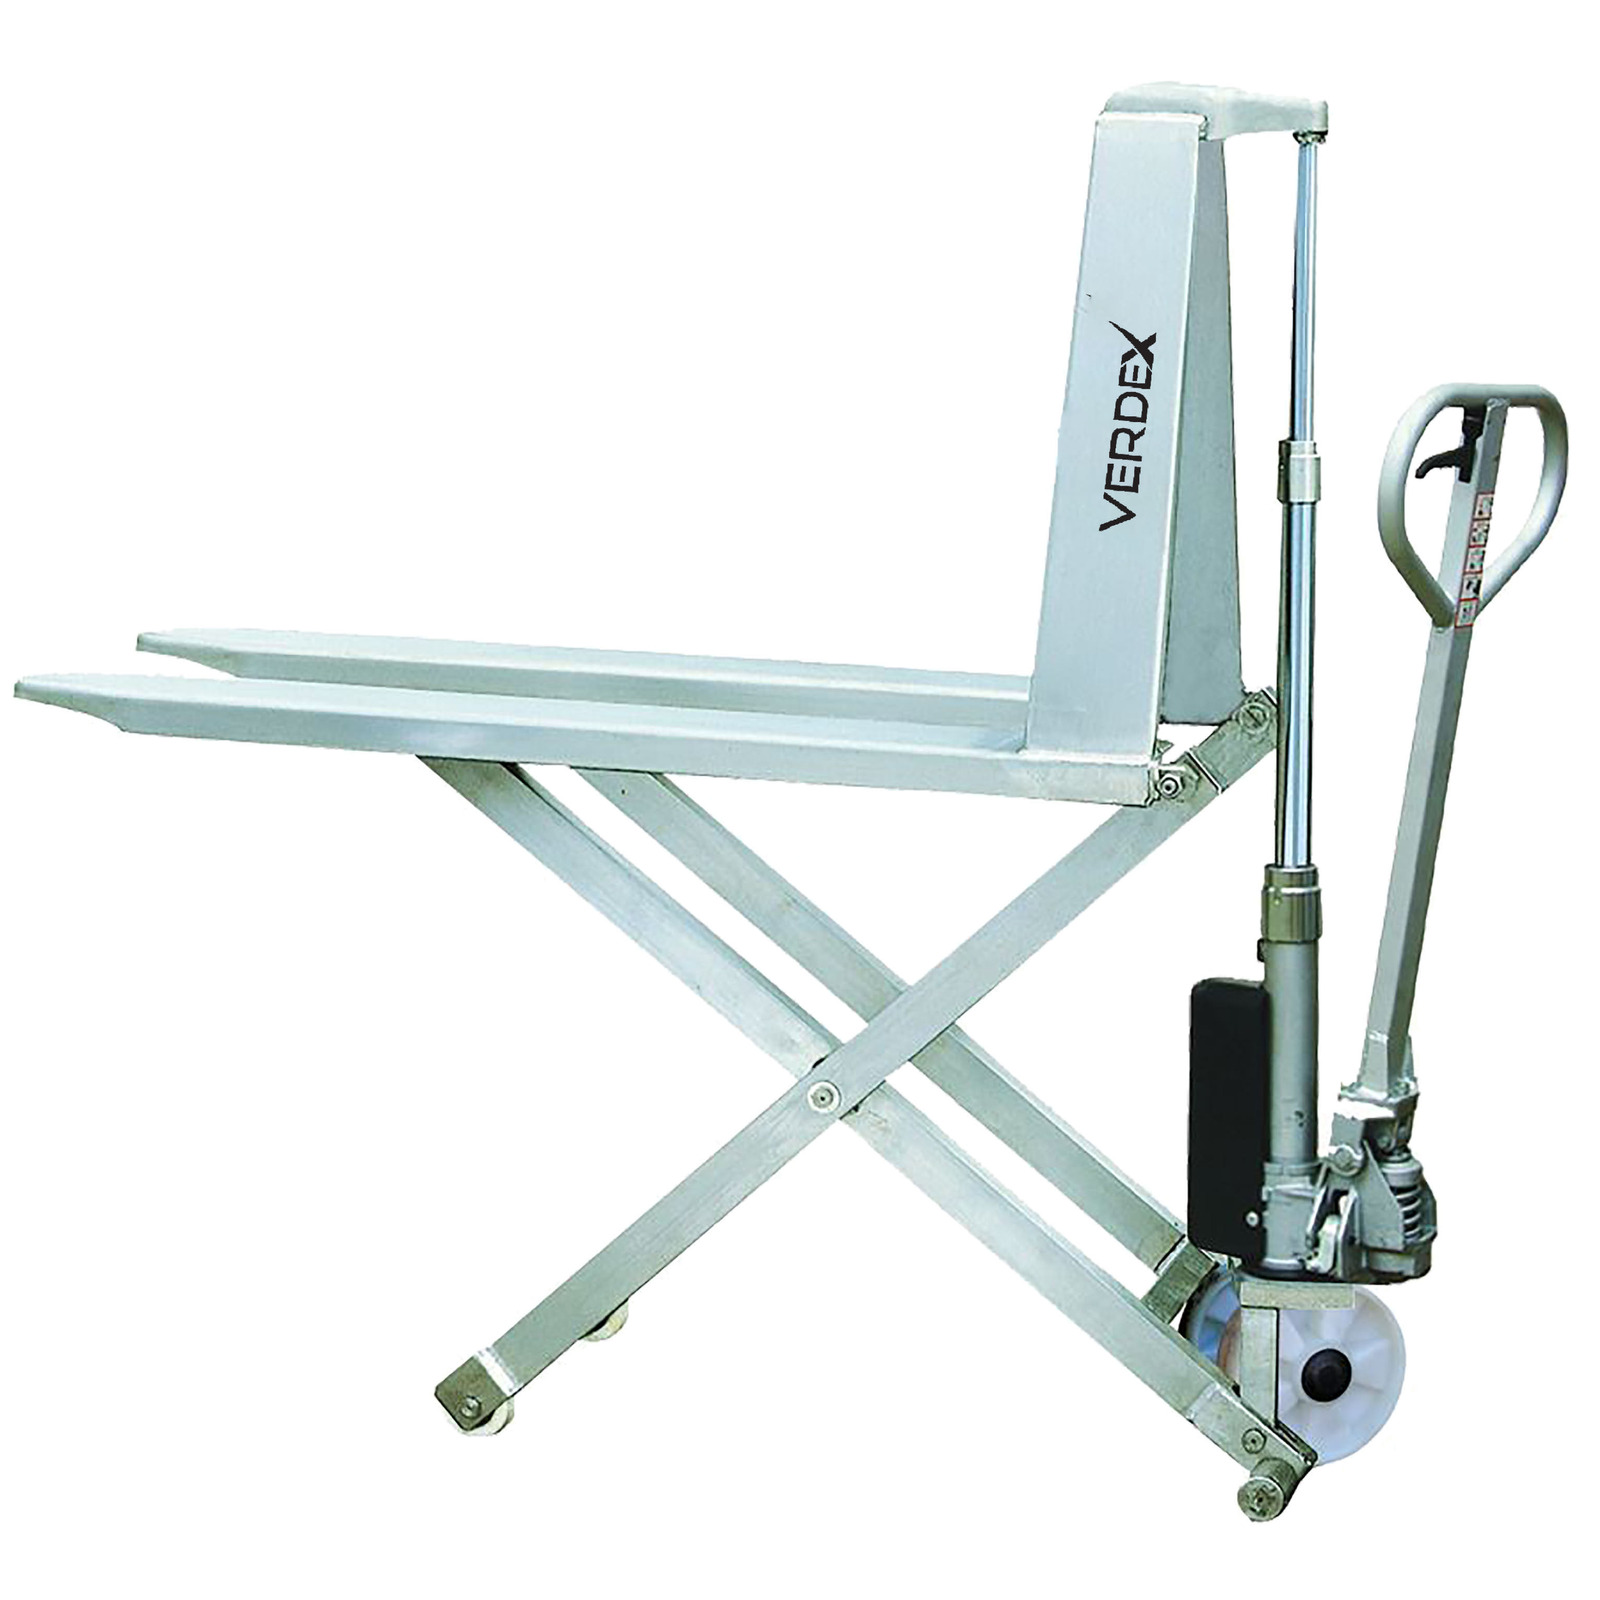 Stainless Steel Hi-Lift Pallet Truck - Manual (685mm wide)